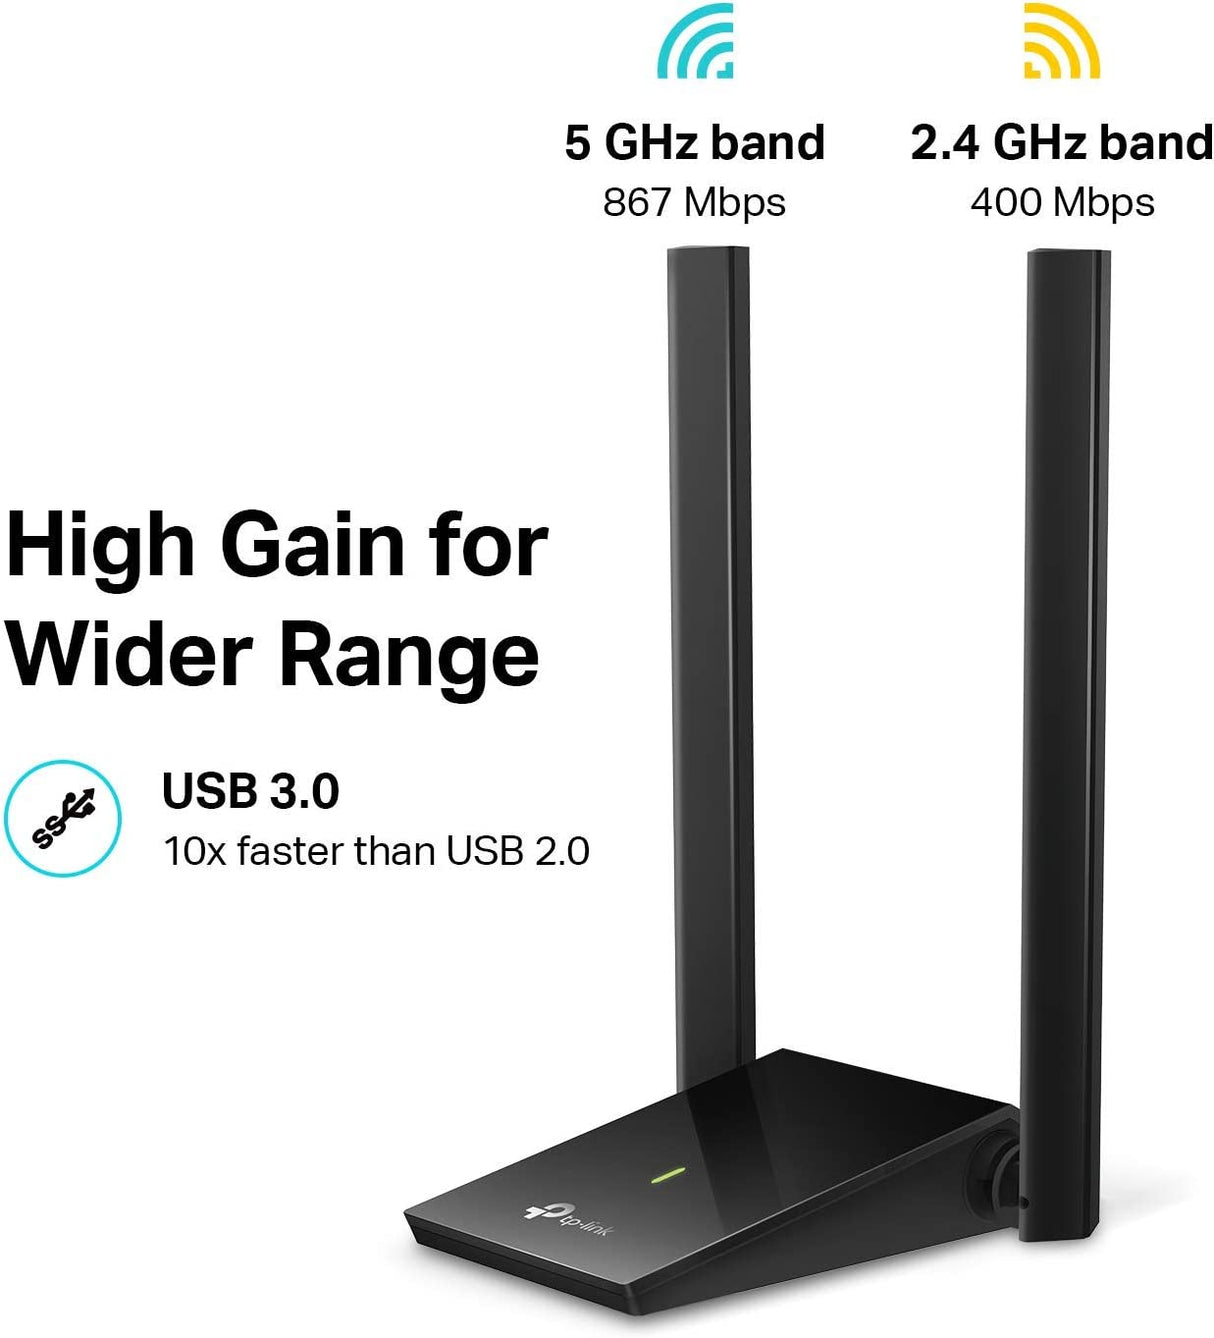 TP-Link USB WiFi Adapter, AC1300Mbps Dual Band 5dBi High Gain Antenna 2.4GHz/ 5GHz Wireless Network Adapter for Desktop PC (Archer T4U Plus)- Supports Windows 11/10/8.1/8/7, Mac OS 10.9 - 10.14 AC1300 Dual Band